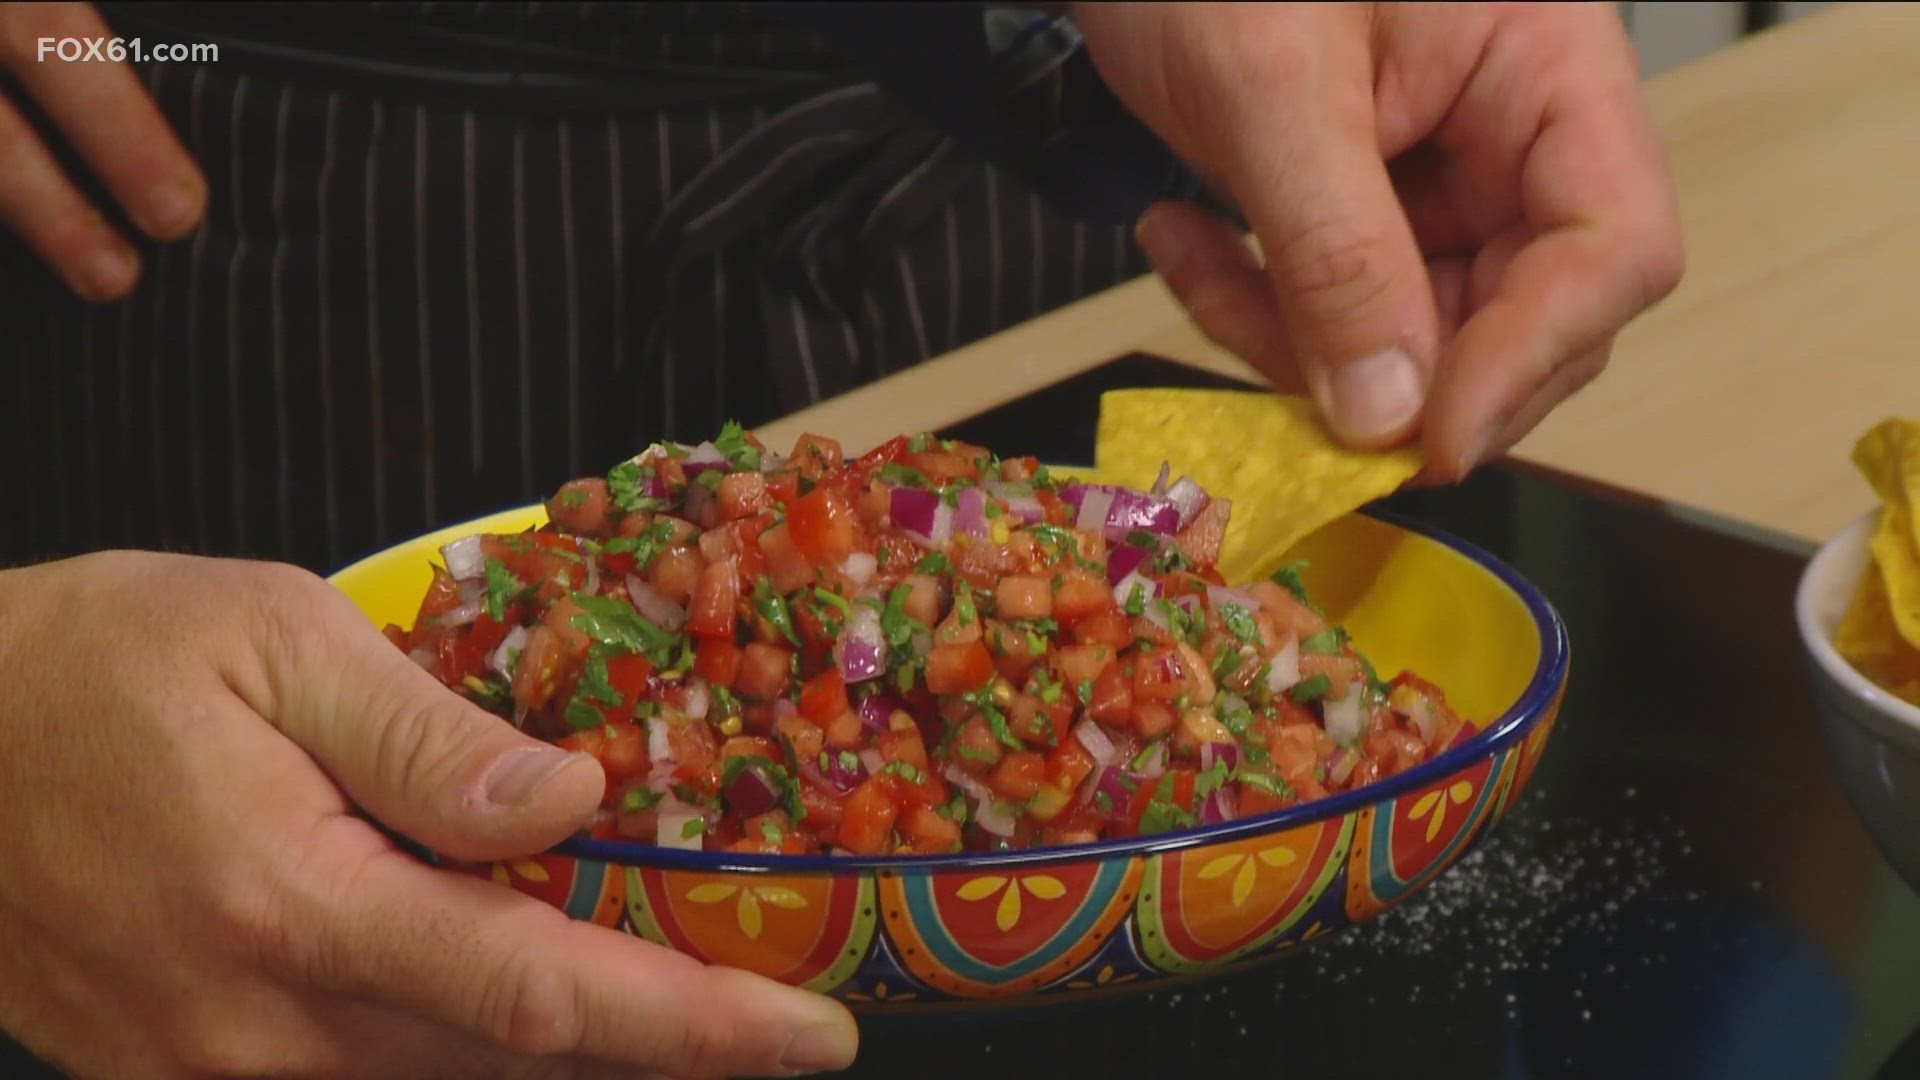 Puente Pub in Unionville shows off its dishes and shares how to make pico de gallo.